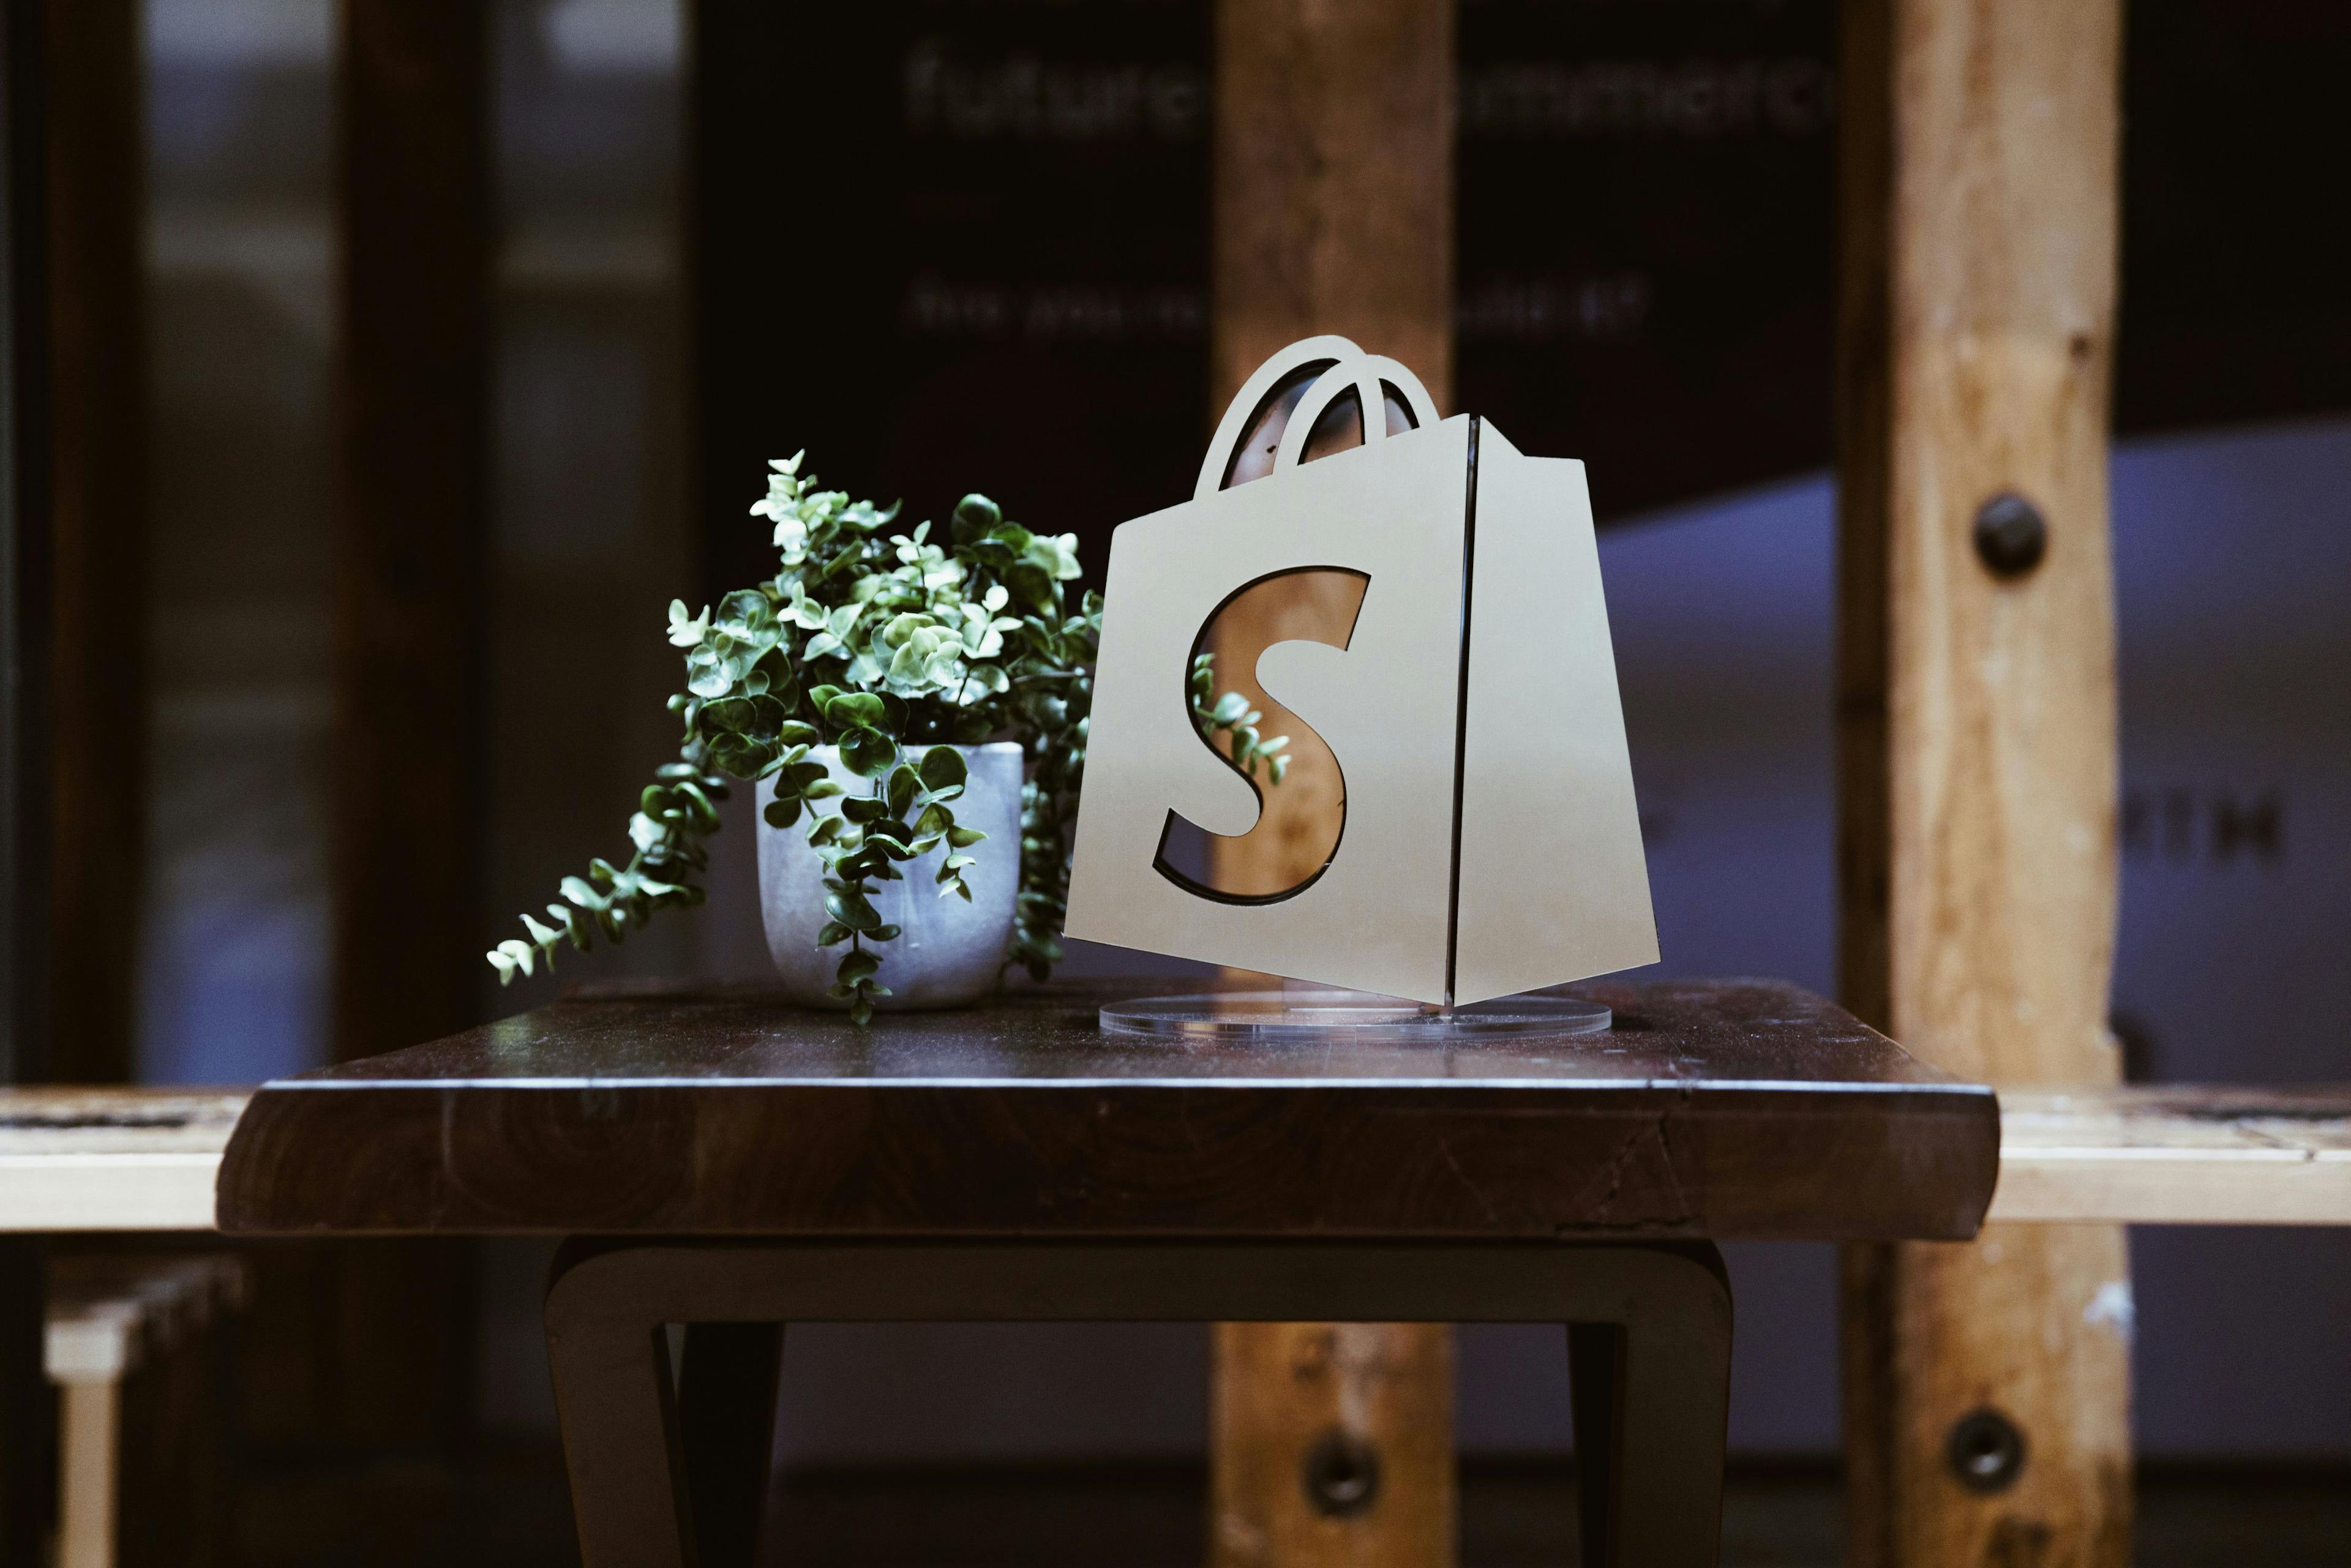 a logo of Shopify on a window in front of a table that could be used as a co-working space for Shopify merchants